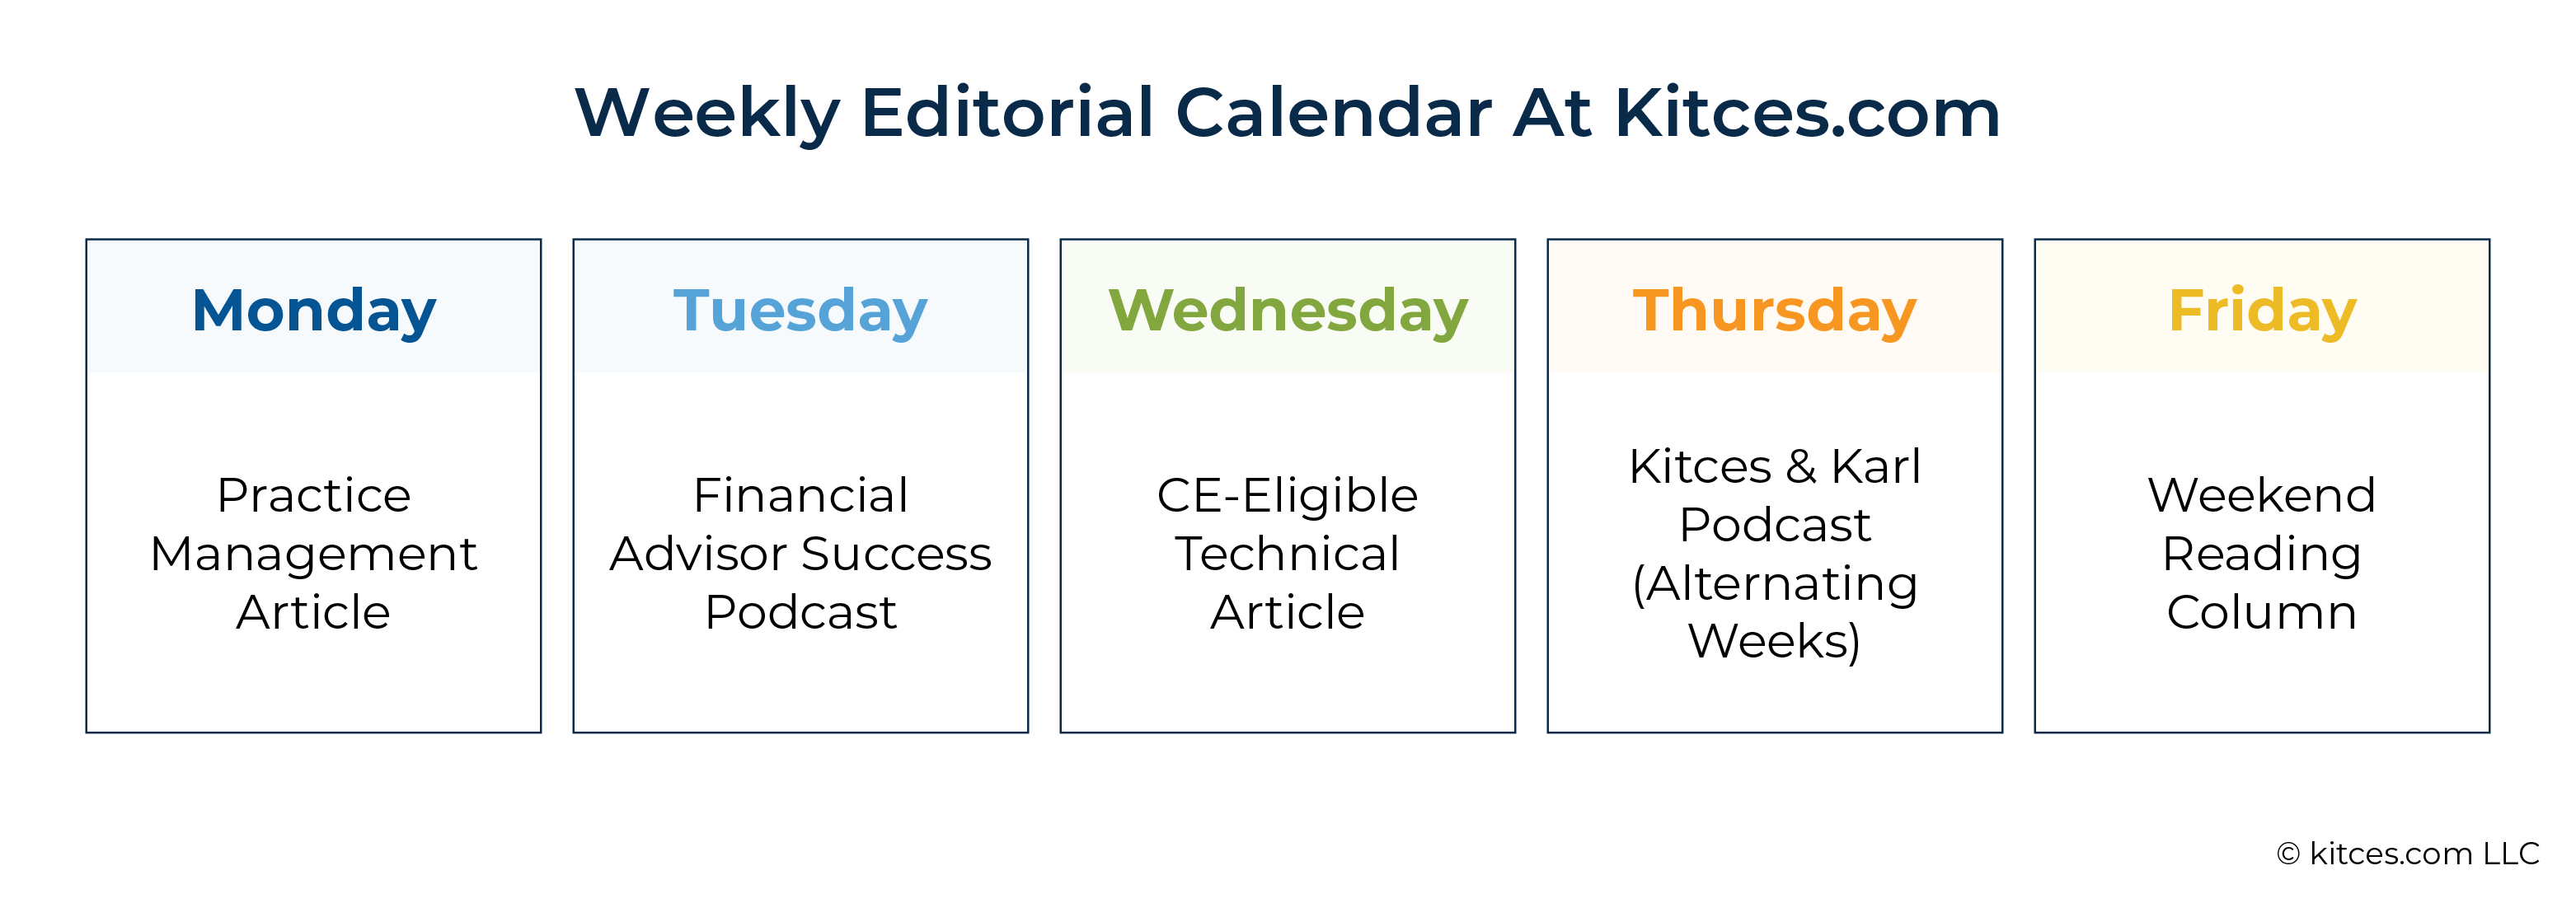 Weekly Editorial Calendar At Kitces com